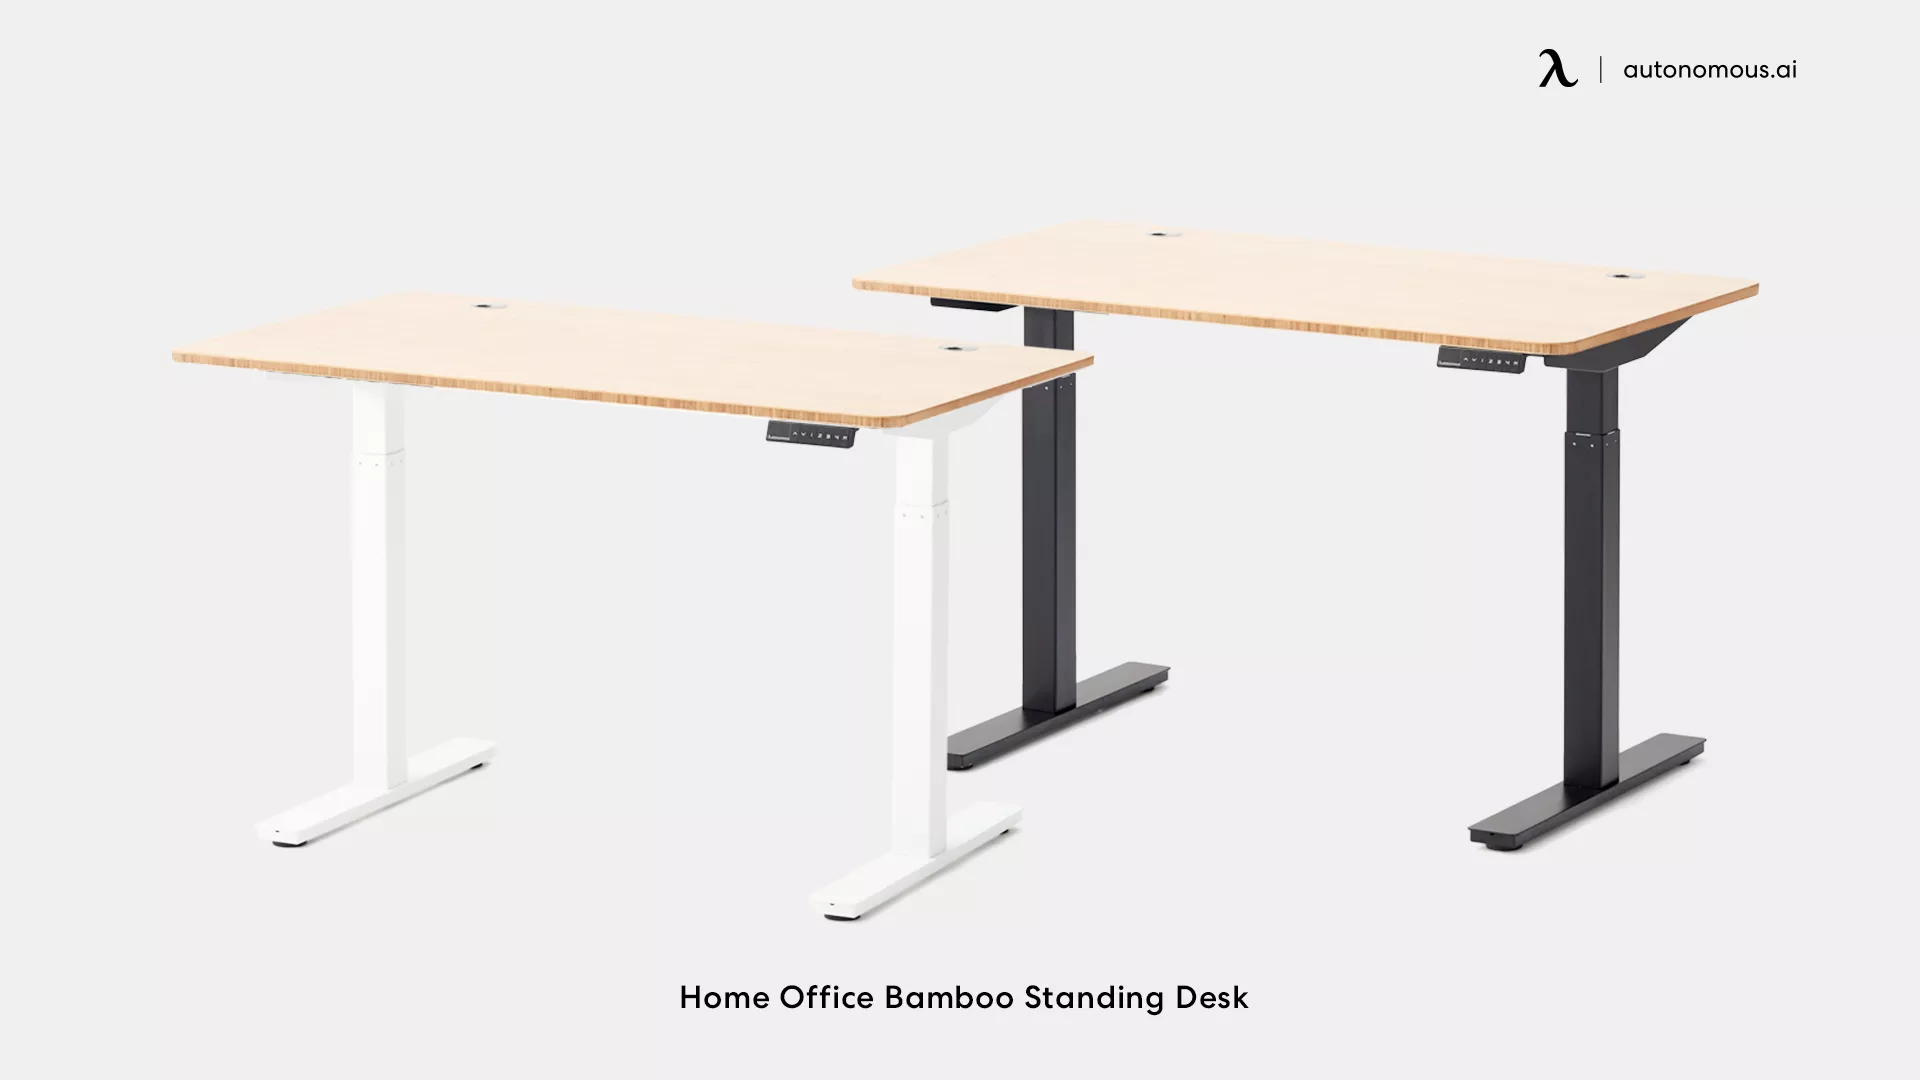 Home Office Bamboo Standing Desk